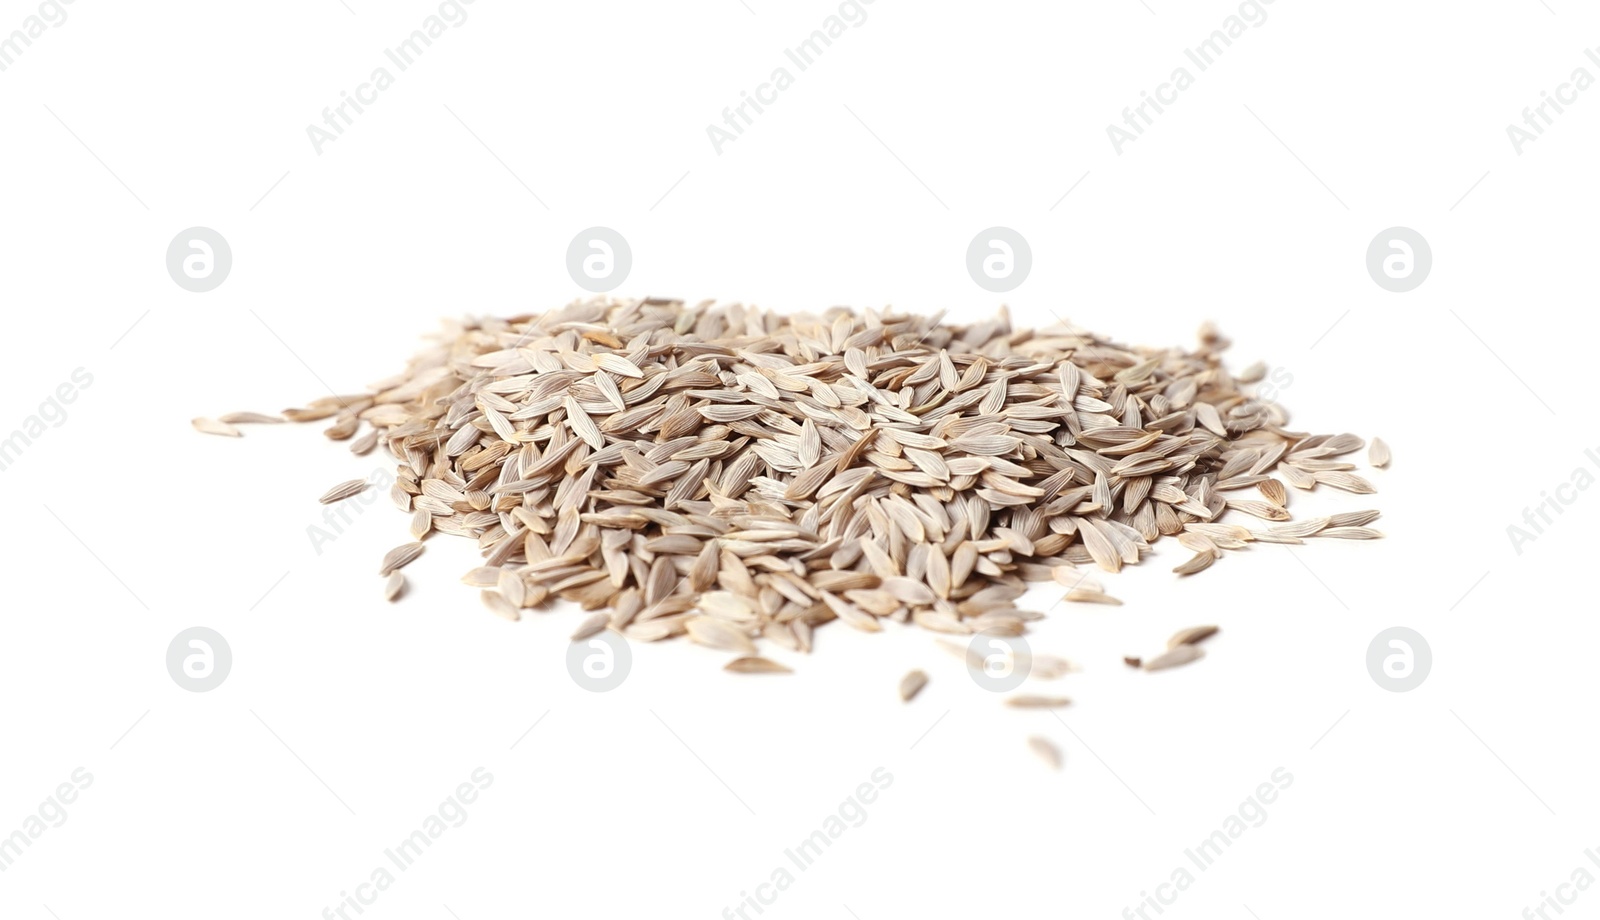 Photo of Pile of lettuce seeds on white background